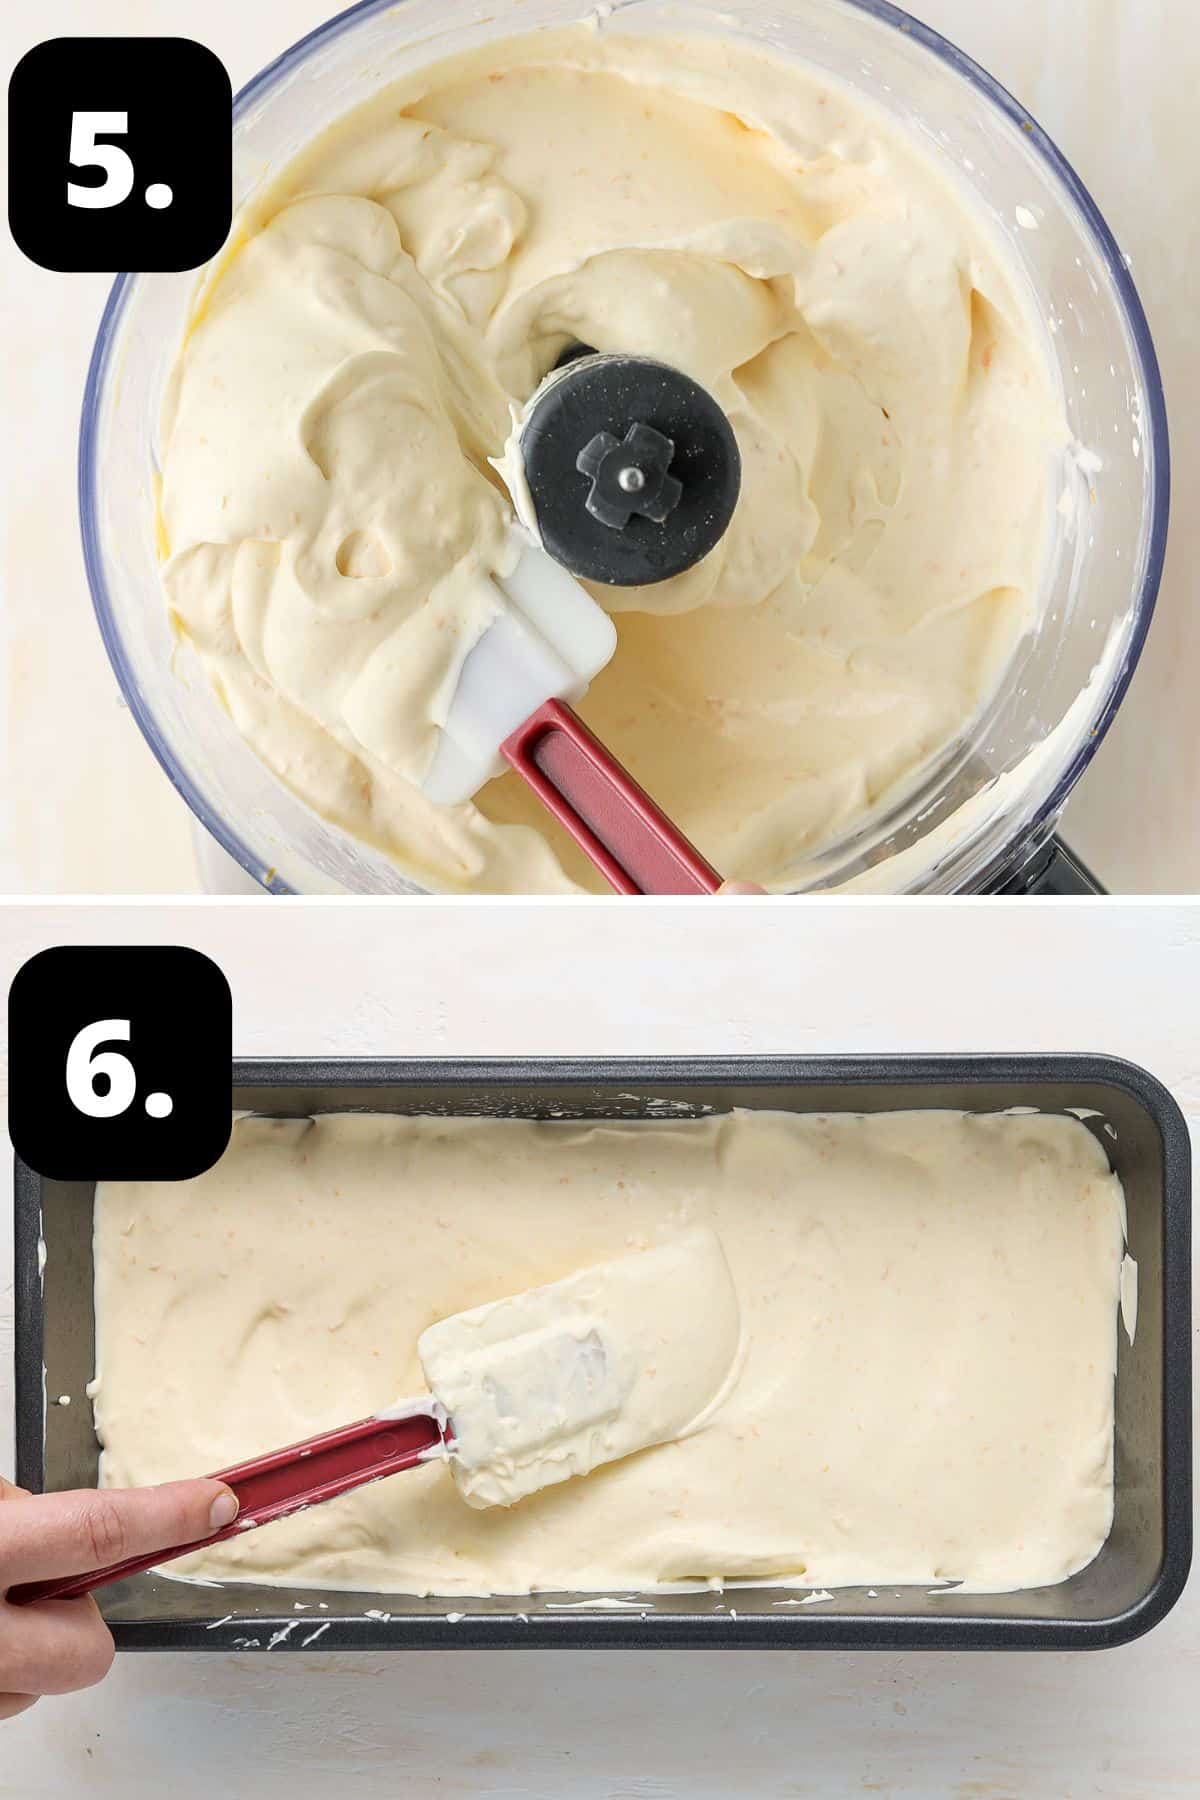 Steps 5-6 of preparing this recipe - the whipped mixture and adding to a tin ready to freeze.